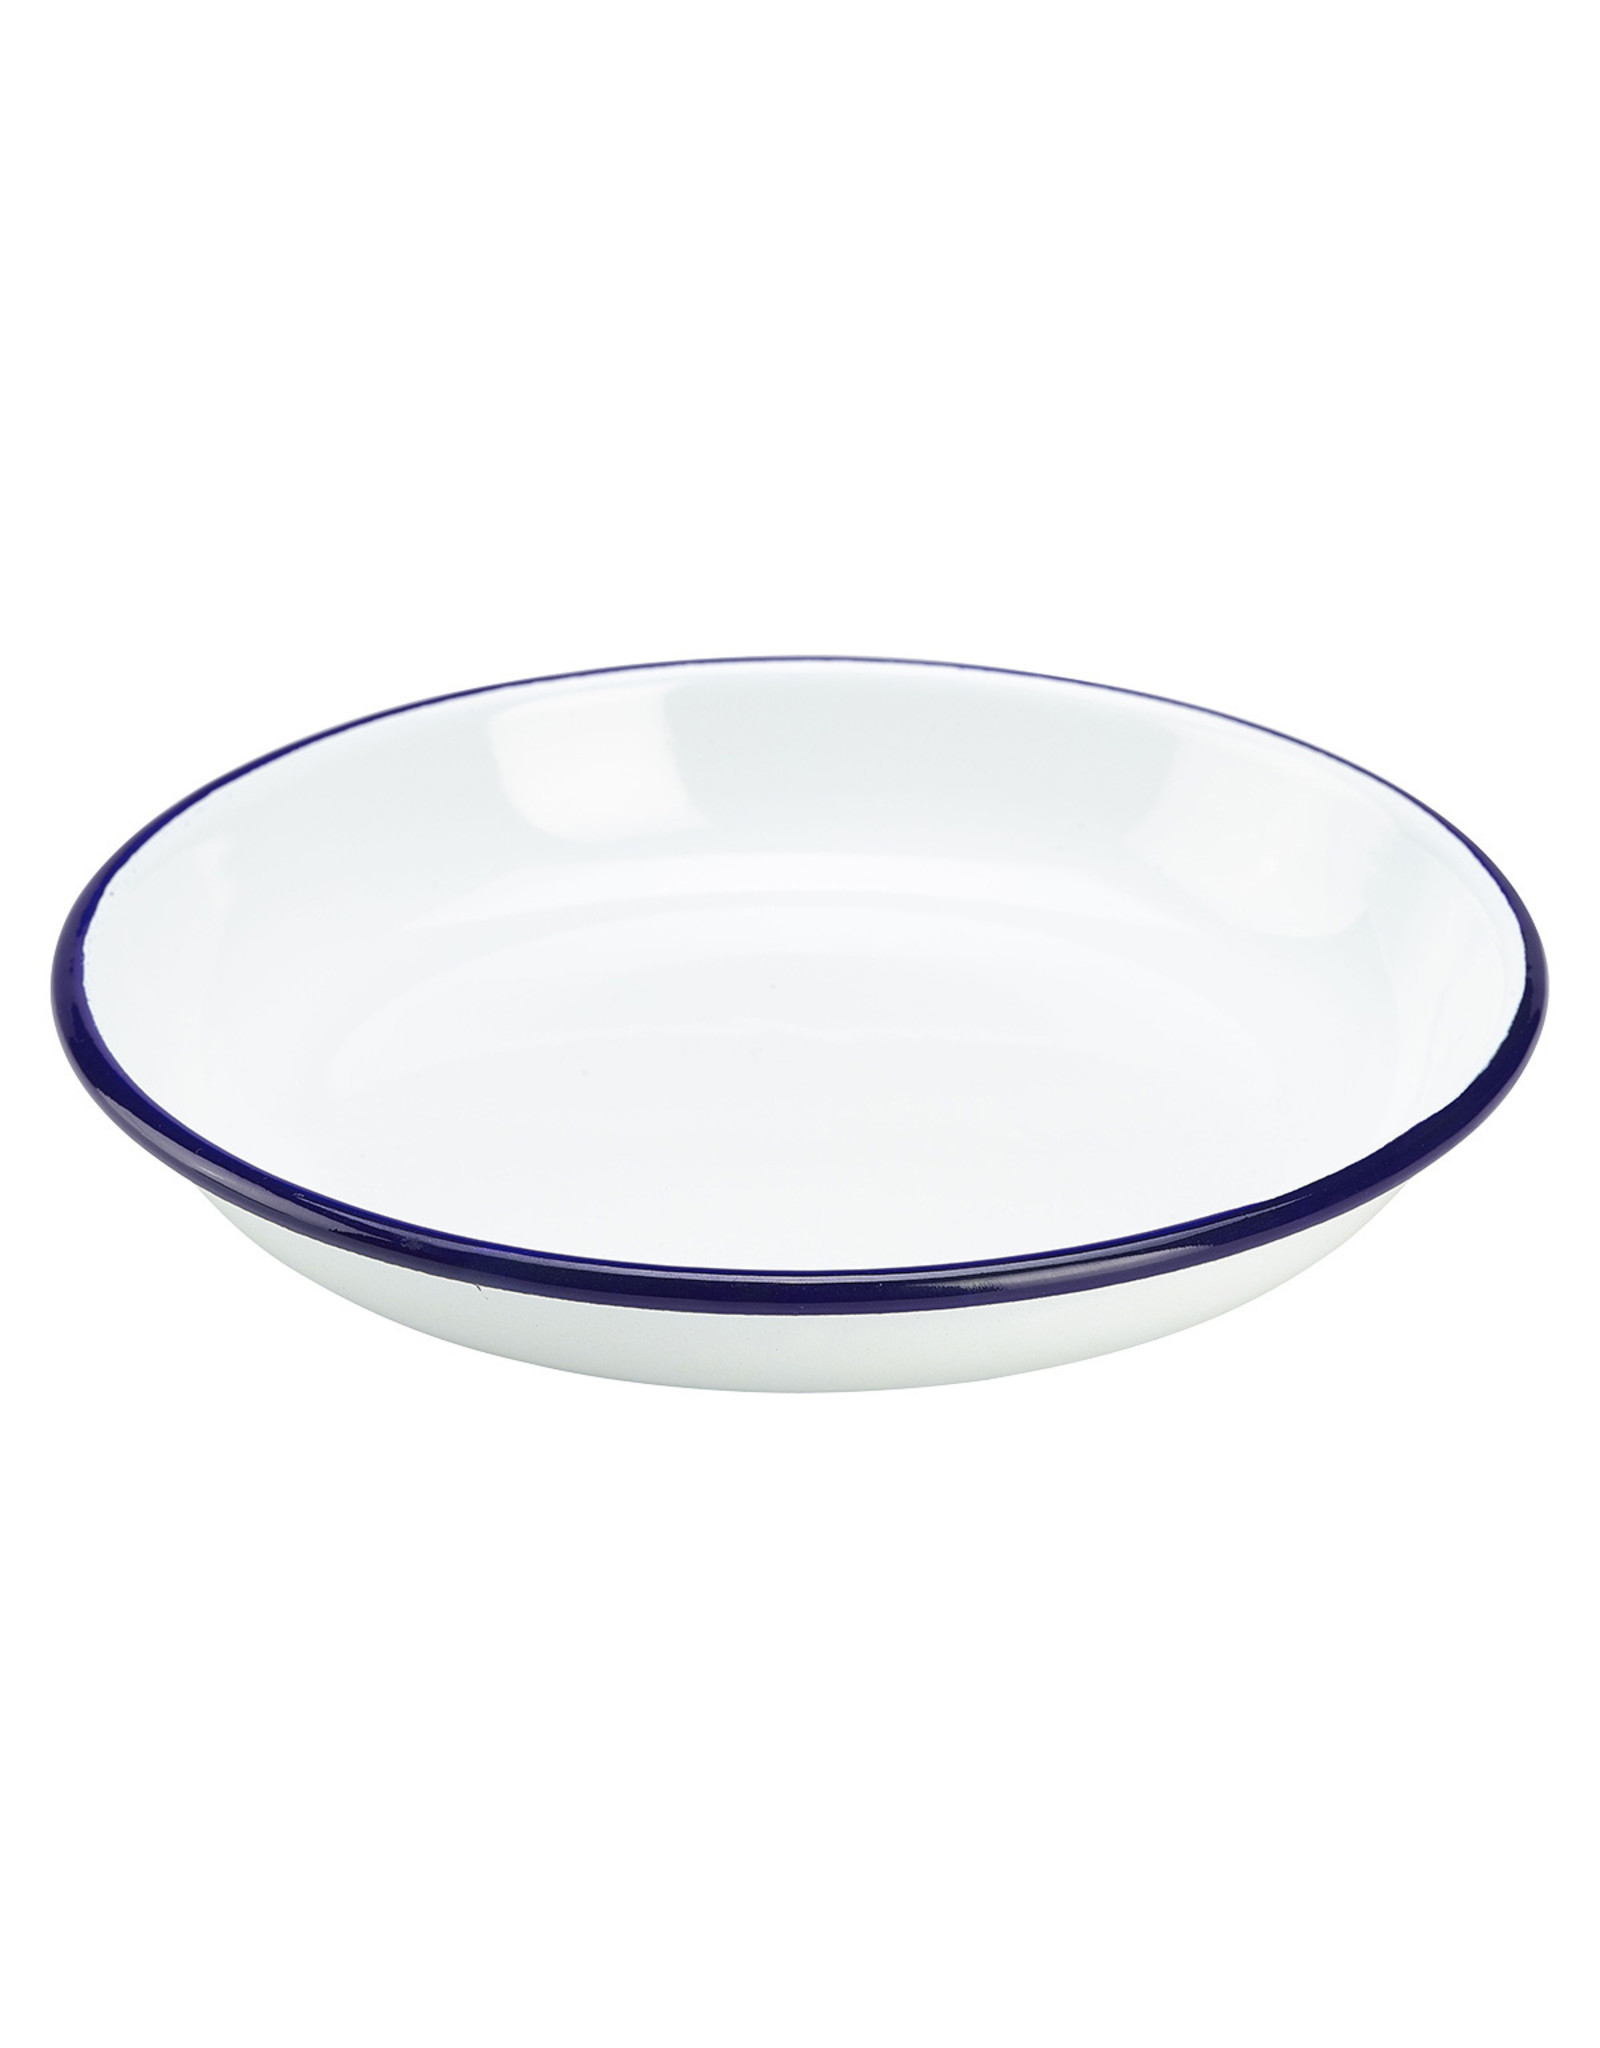 Stylepoint Enamel pasta plate with blue rim 18 cm